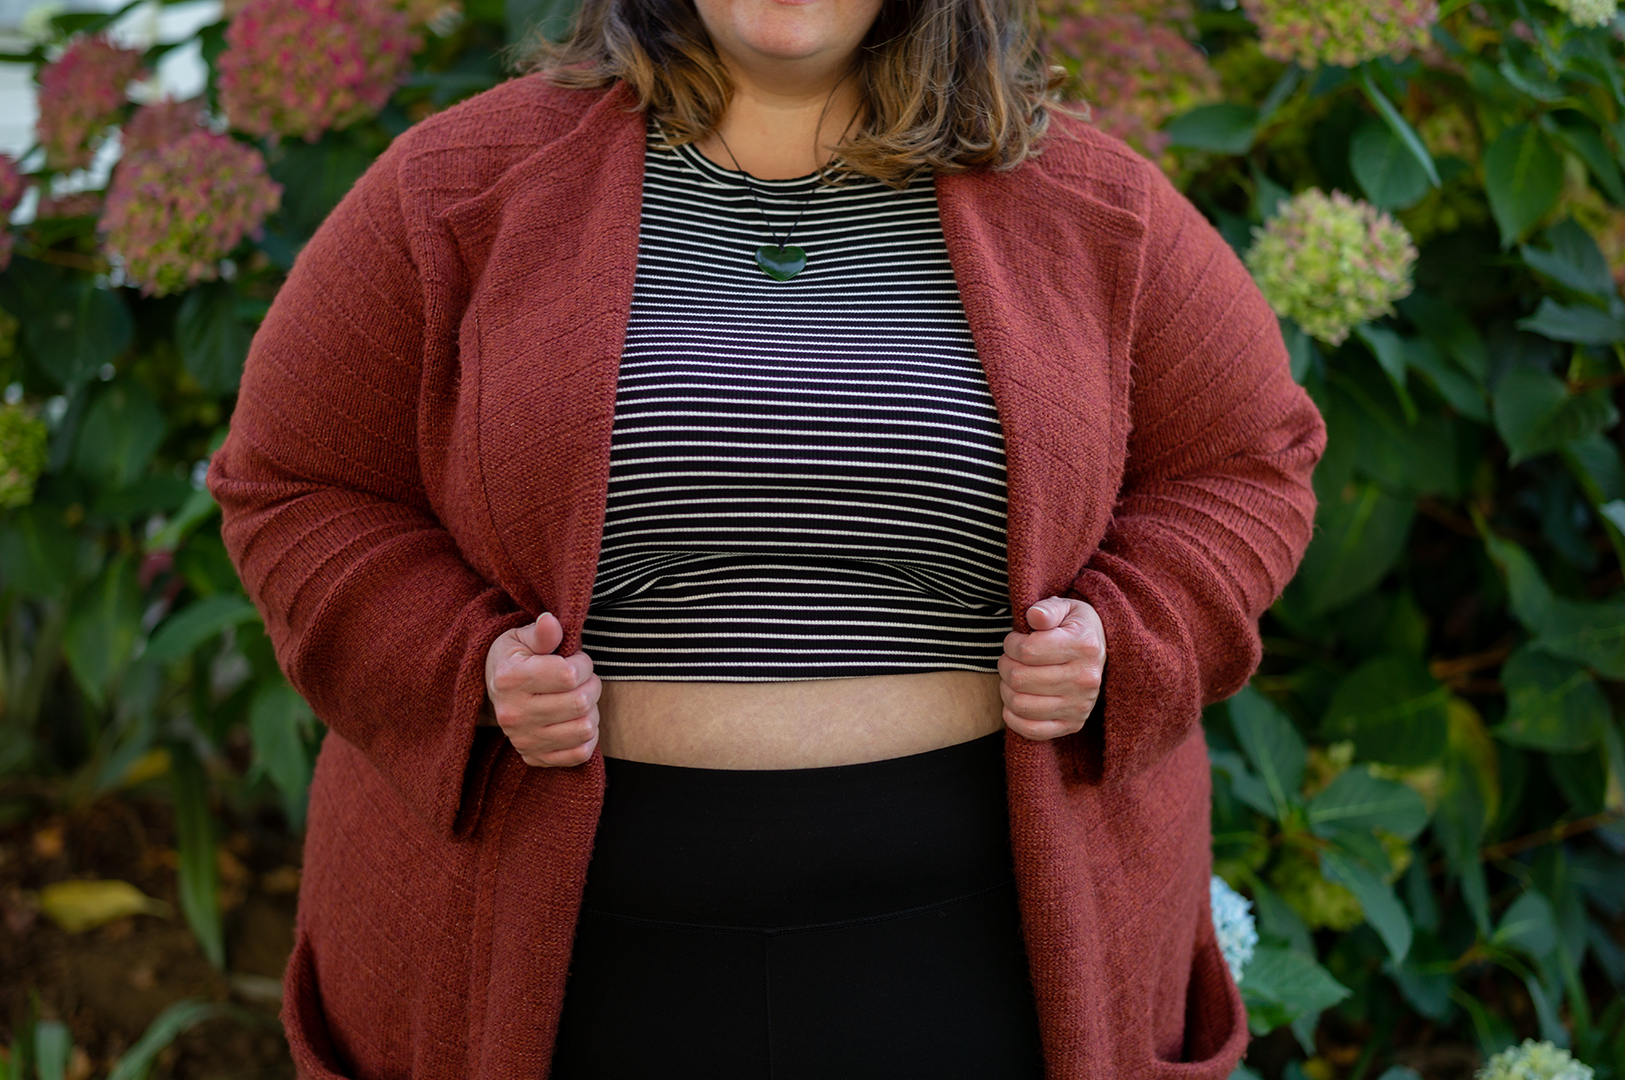 New Zealand plus size blogger Meagan Kerr stands in front of a hydrangrea bush. The photo is cropped to show from her chin to her hips. Meagan wears a midriff baring City Chic Cheeky Stripe Top in XXL, Snag Tights Leggings in H, Old Navy Rust Cardigan in 4X